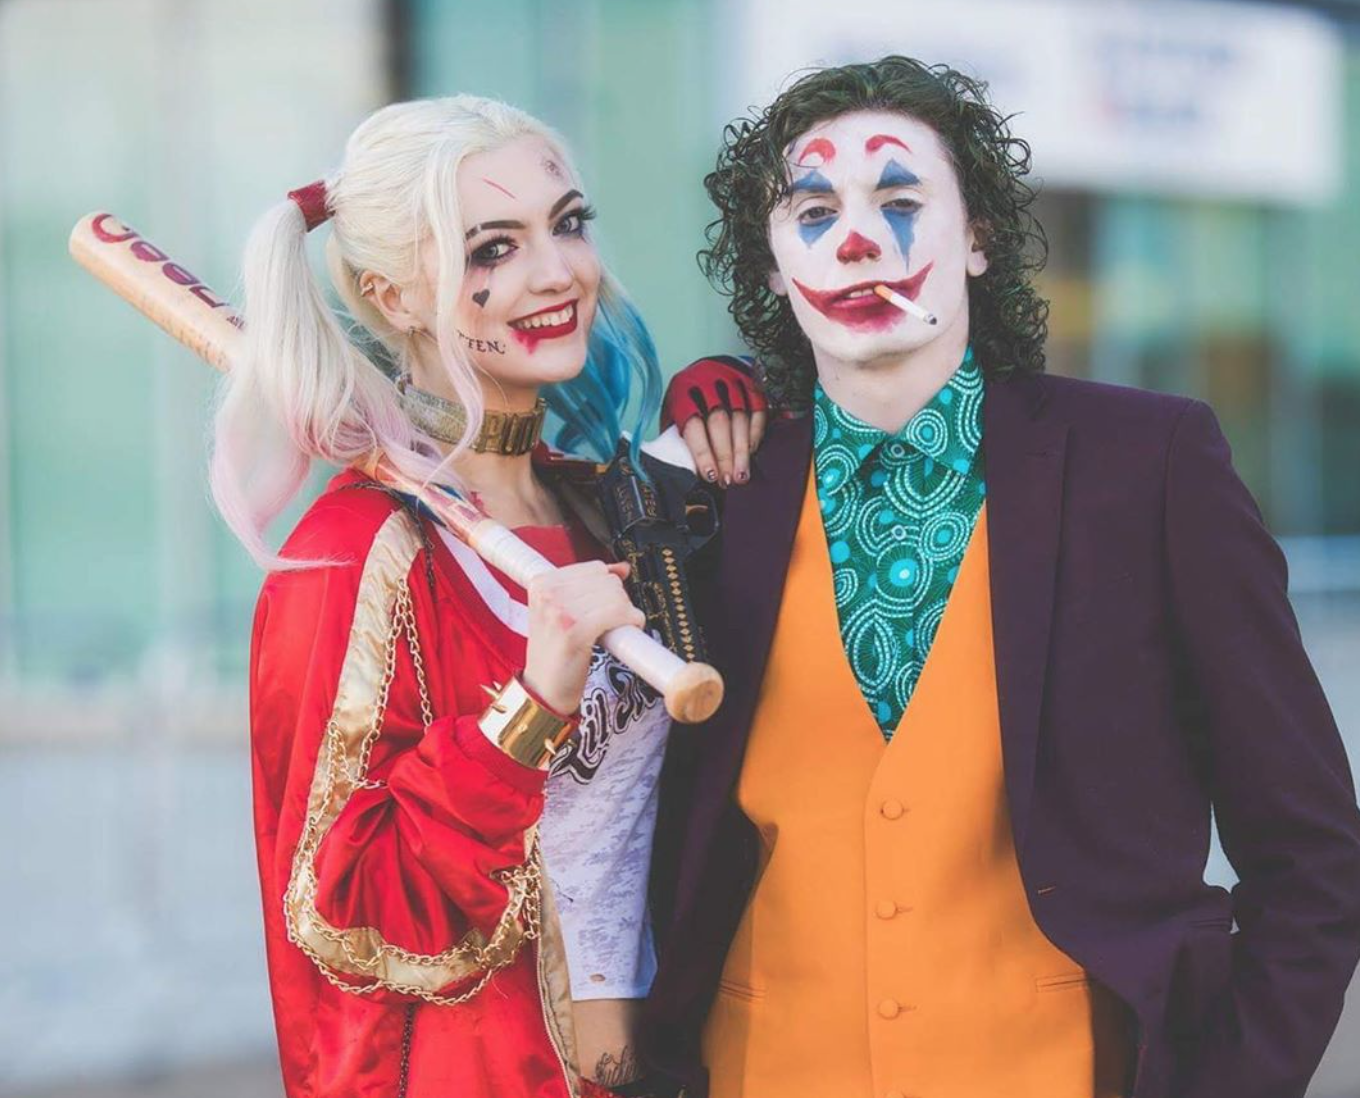 Halloween Dress up Ideas for Couples